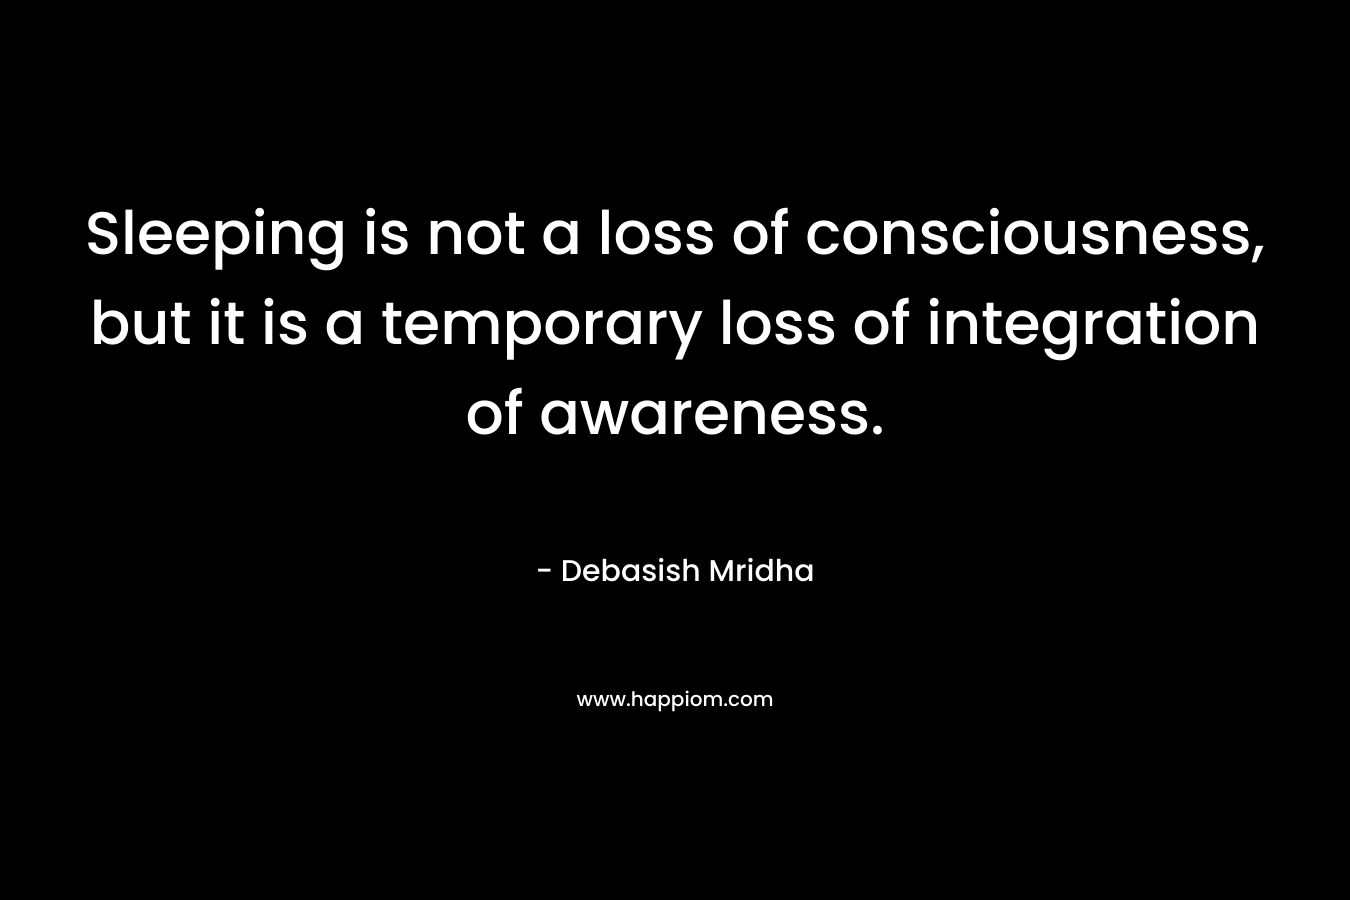 Sleeping is not a loss of consciousness, but it is a temporary loss of integration of awareness.